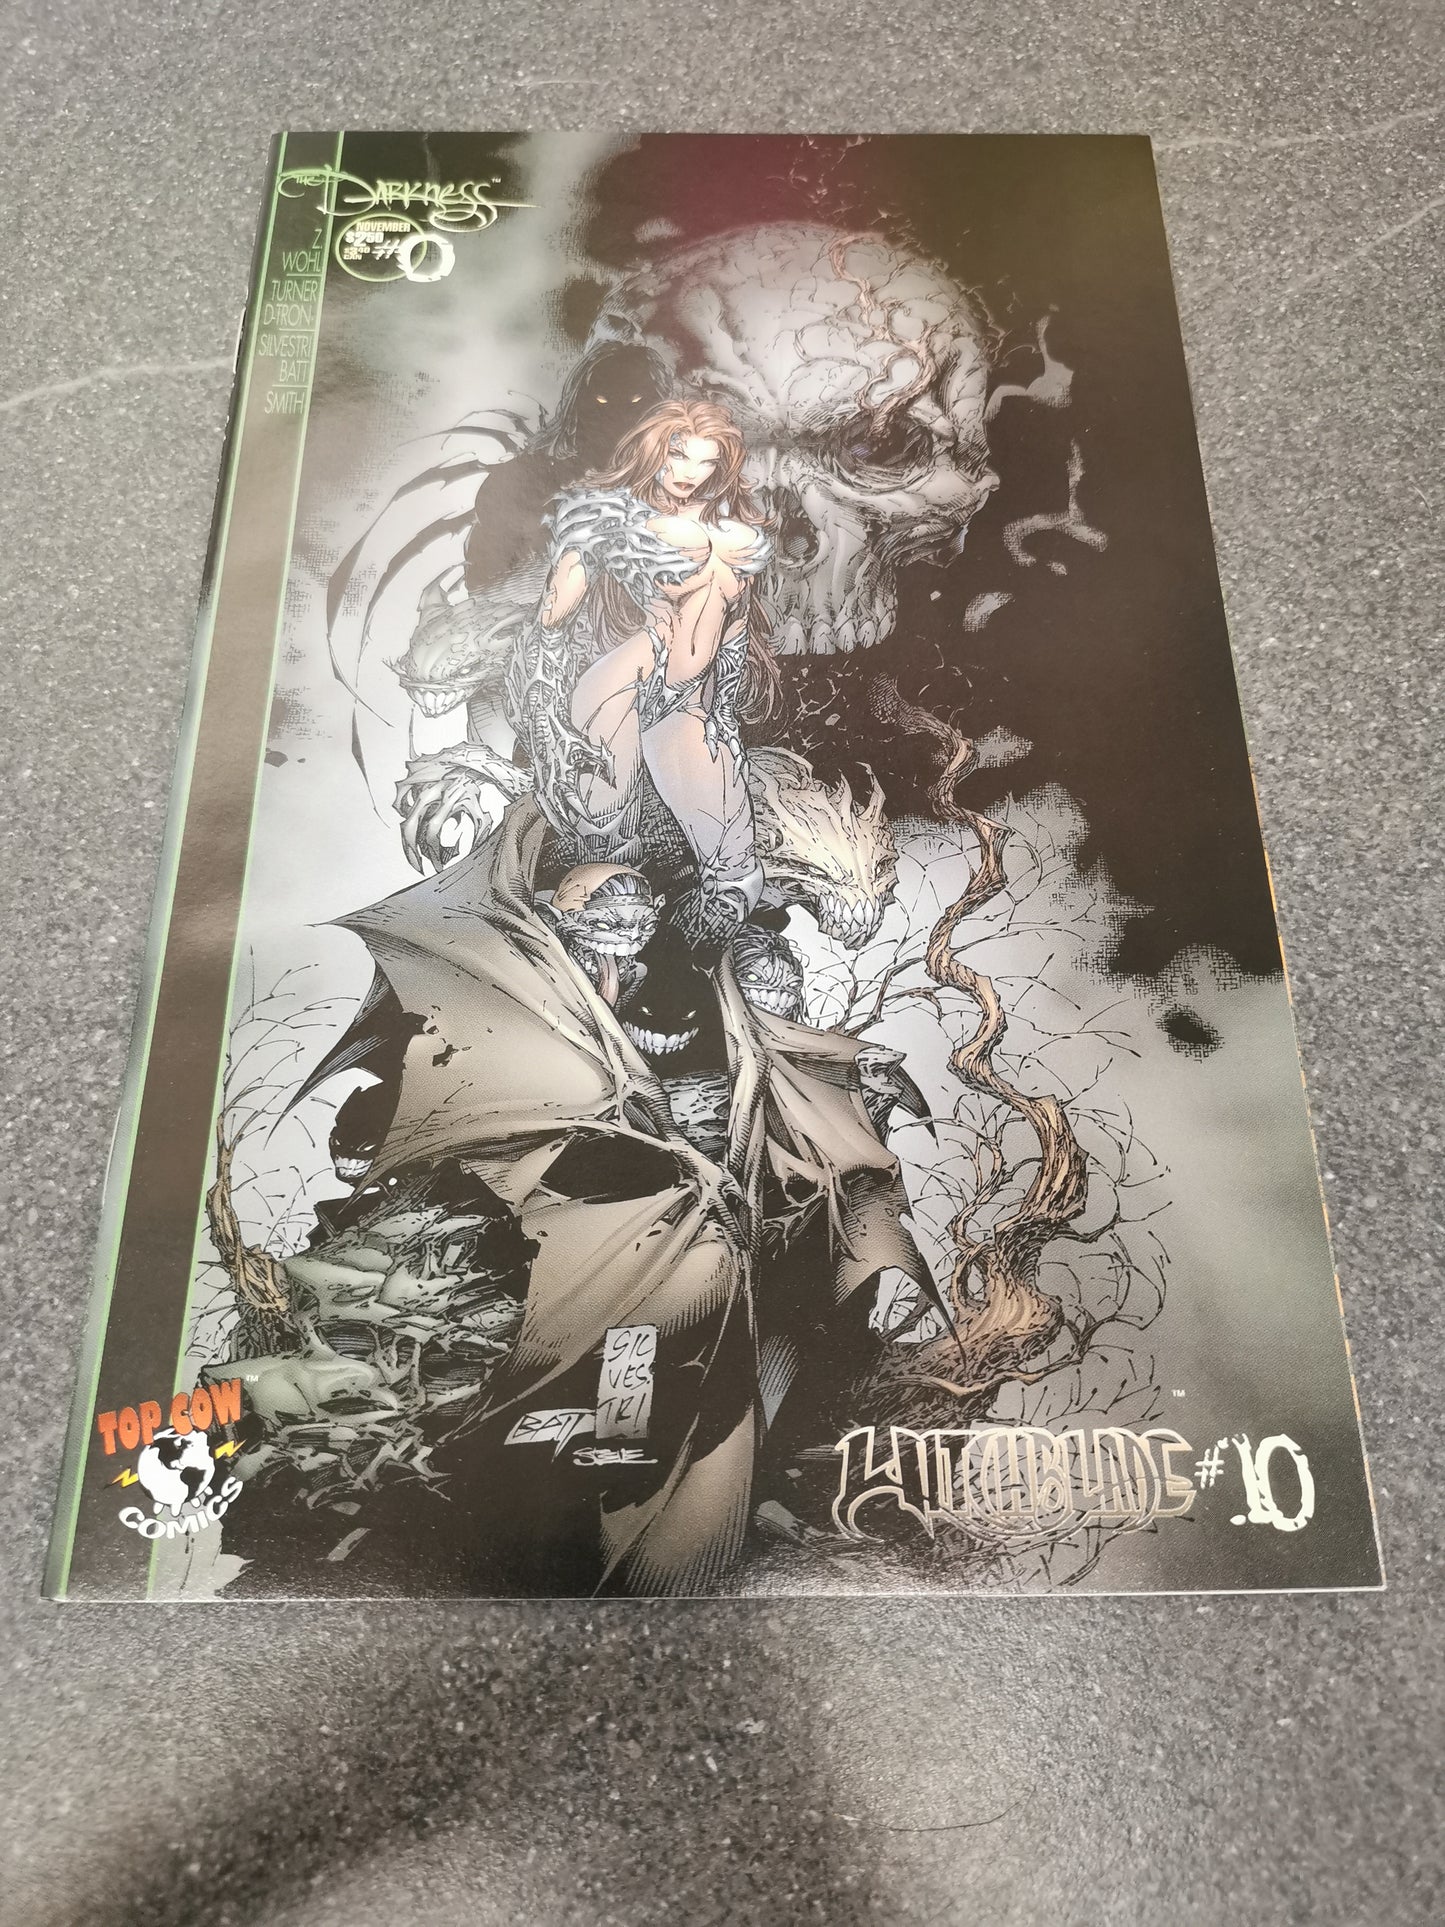 Witchblade #10 1996 1st appearance of Darkness Image comic